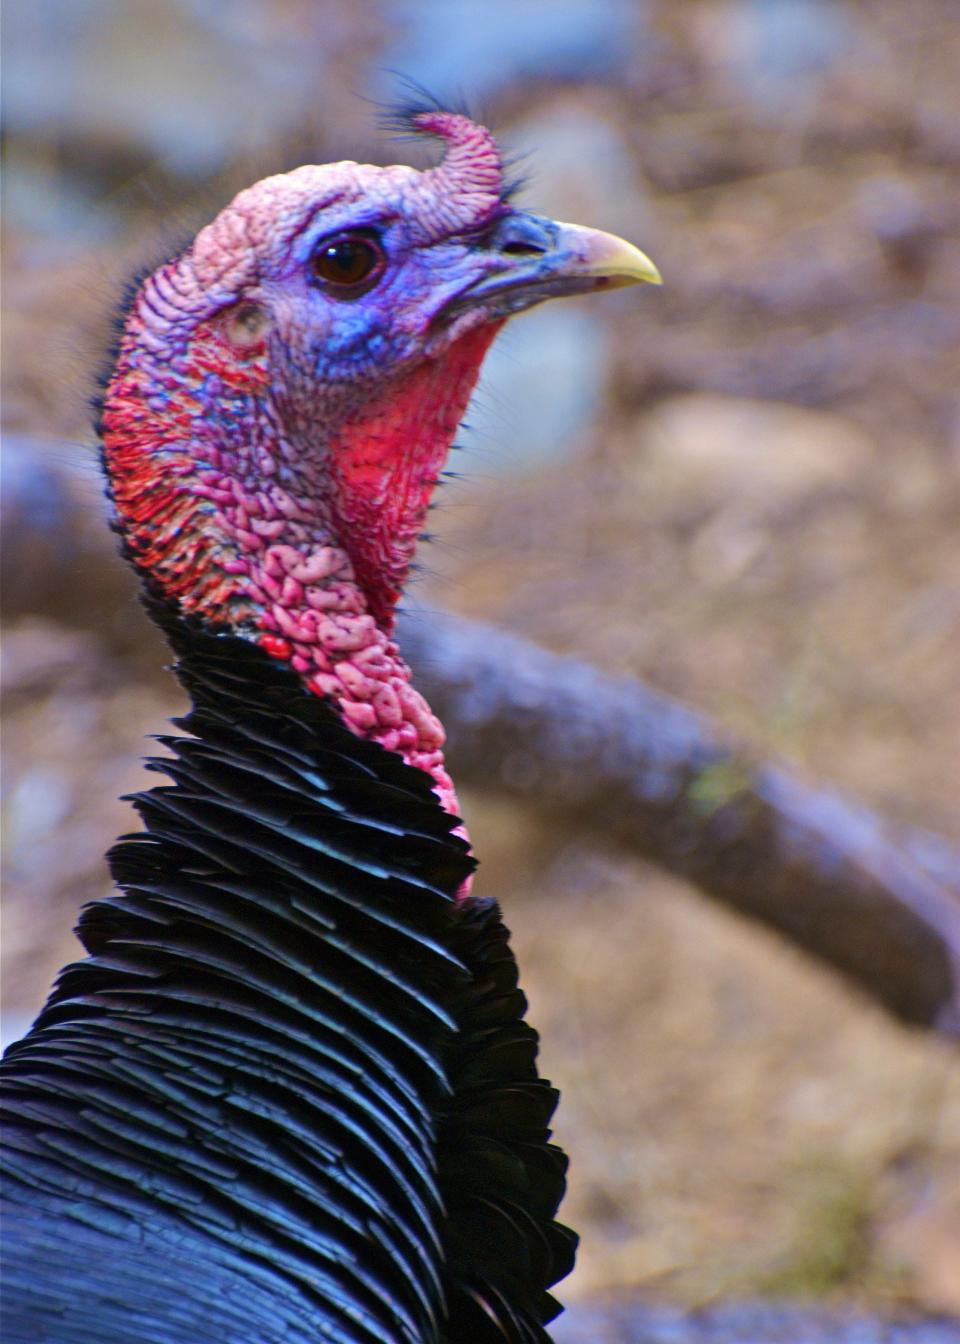 One way individual turkeys recognize each other is by the appearance of their heads. The head and neck of the adult male wild turkey is largely bare and varies in color from red to blue to white, depending on the bird’s mood.